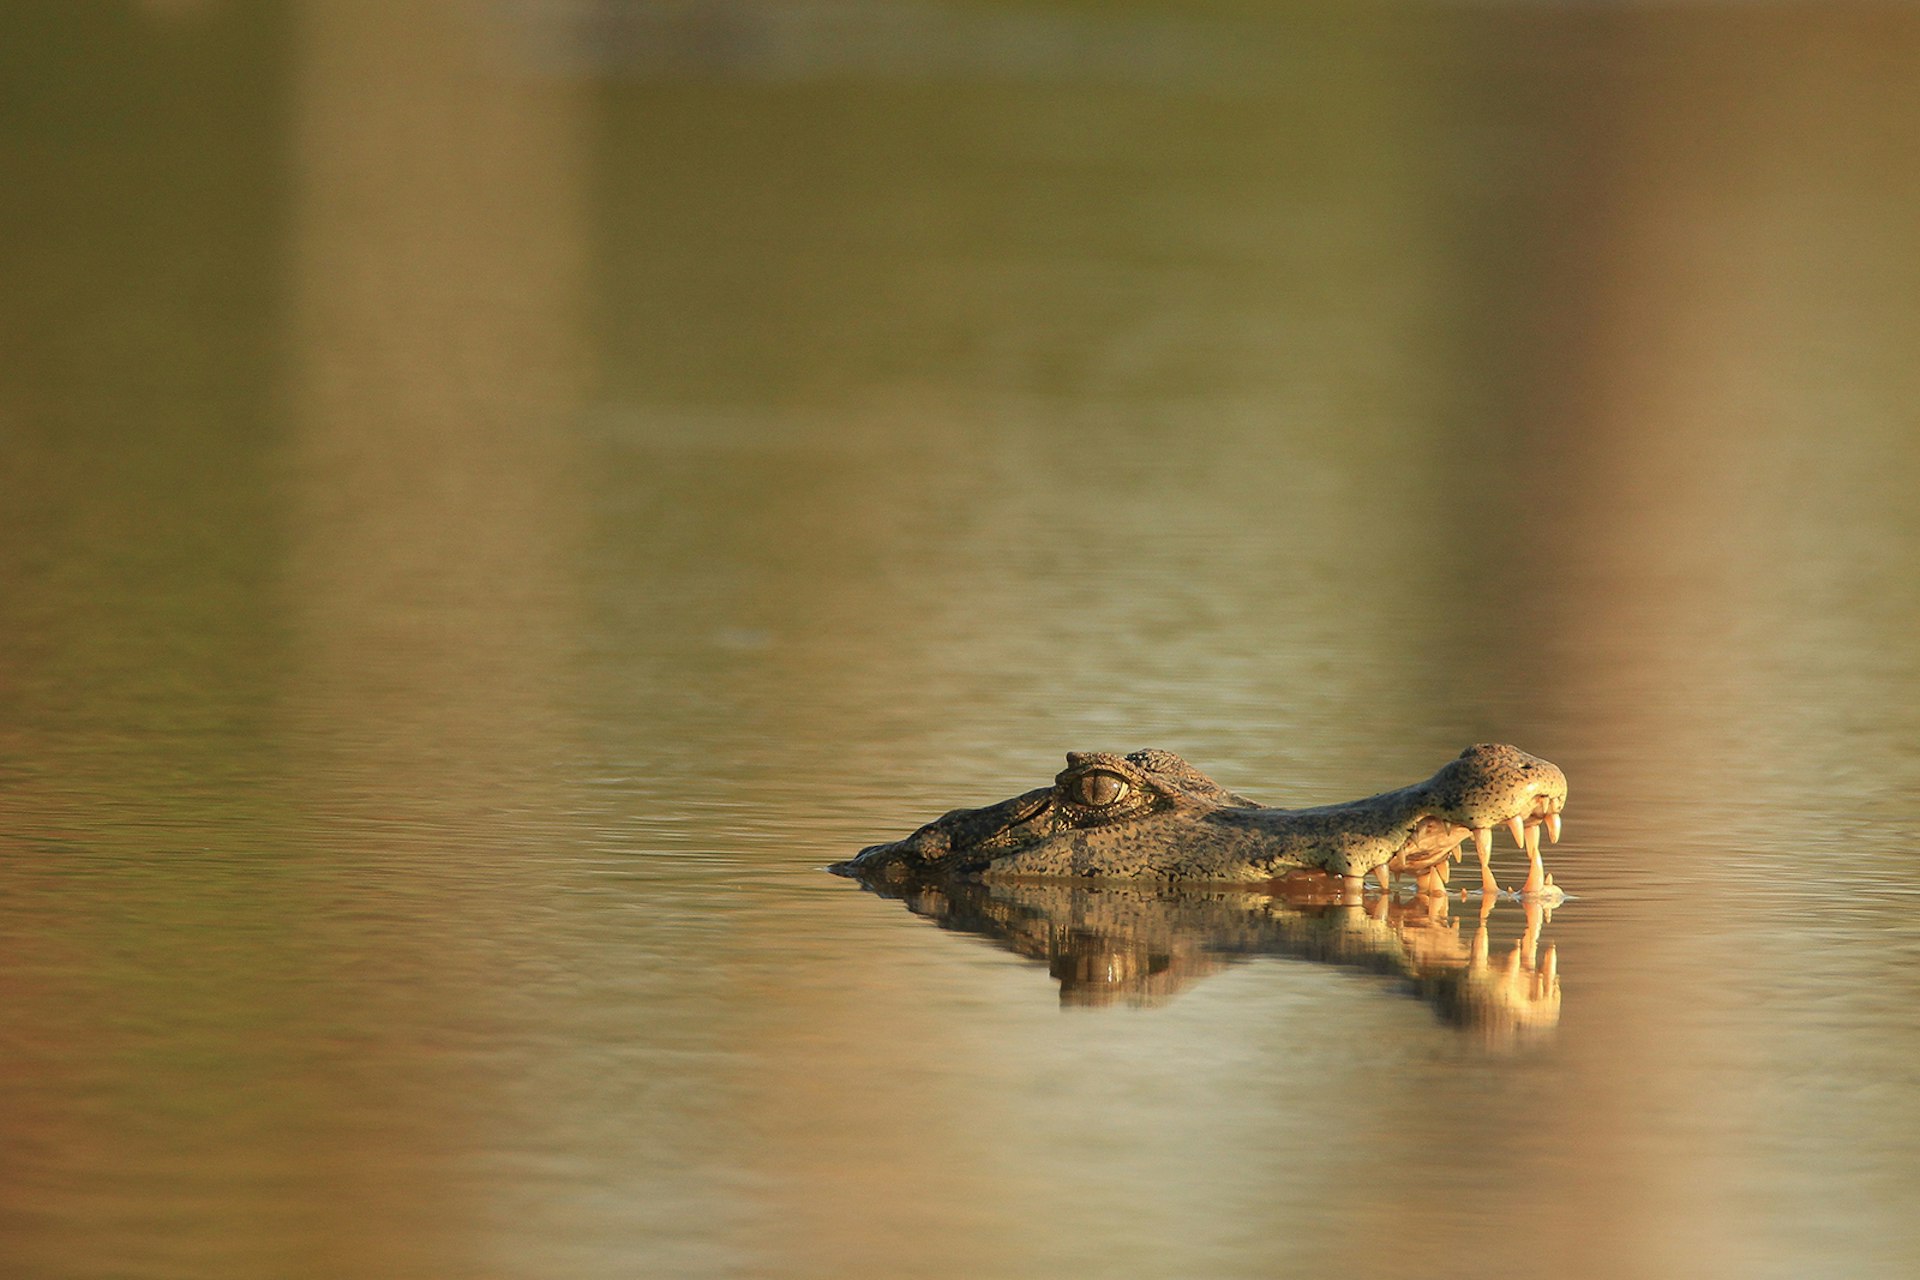 A caiman sits at the water's surface with its jaws open © Chantelle du Plessis